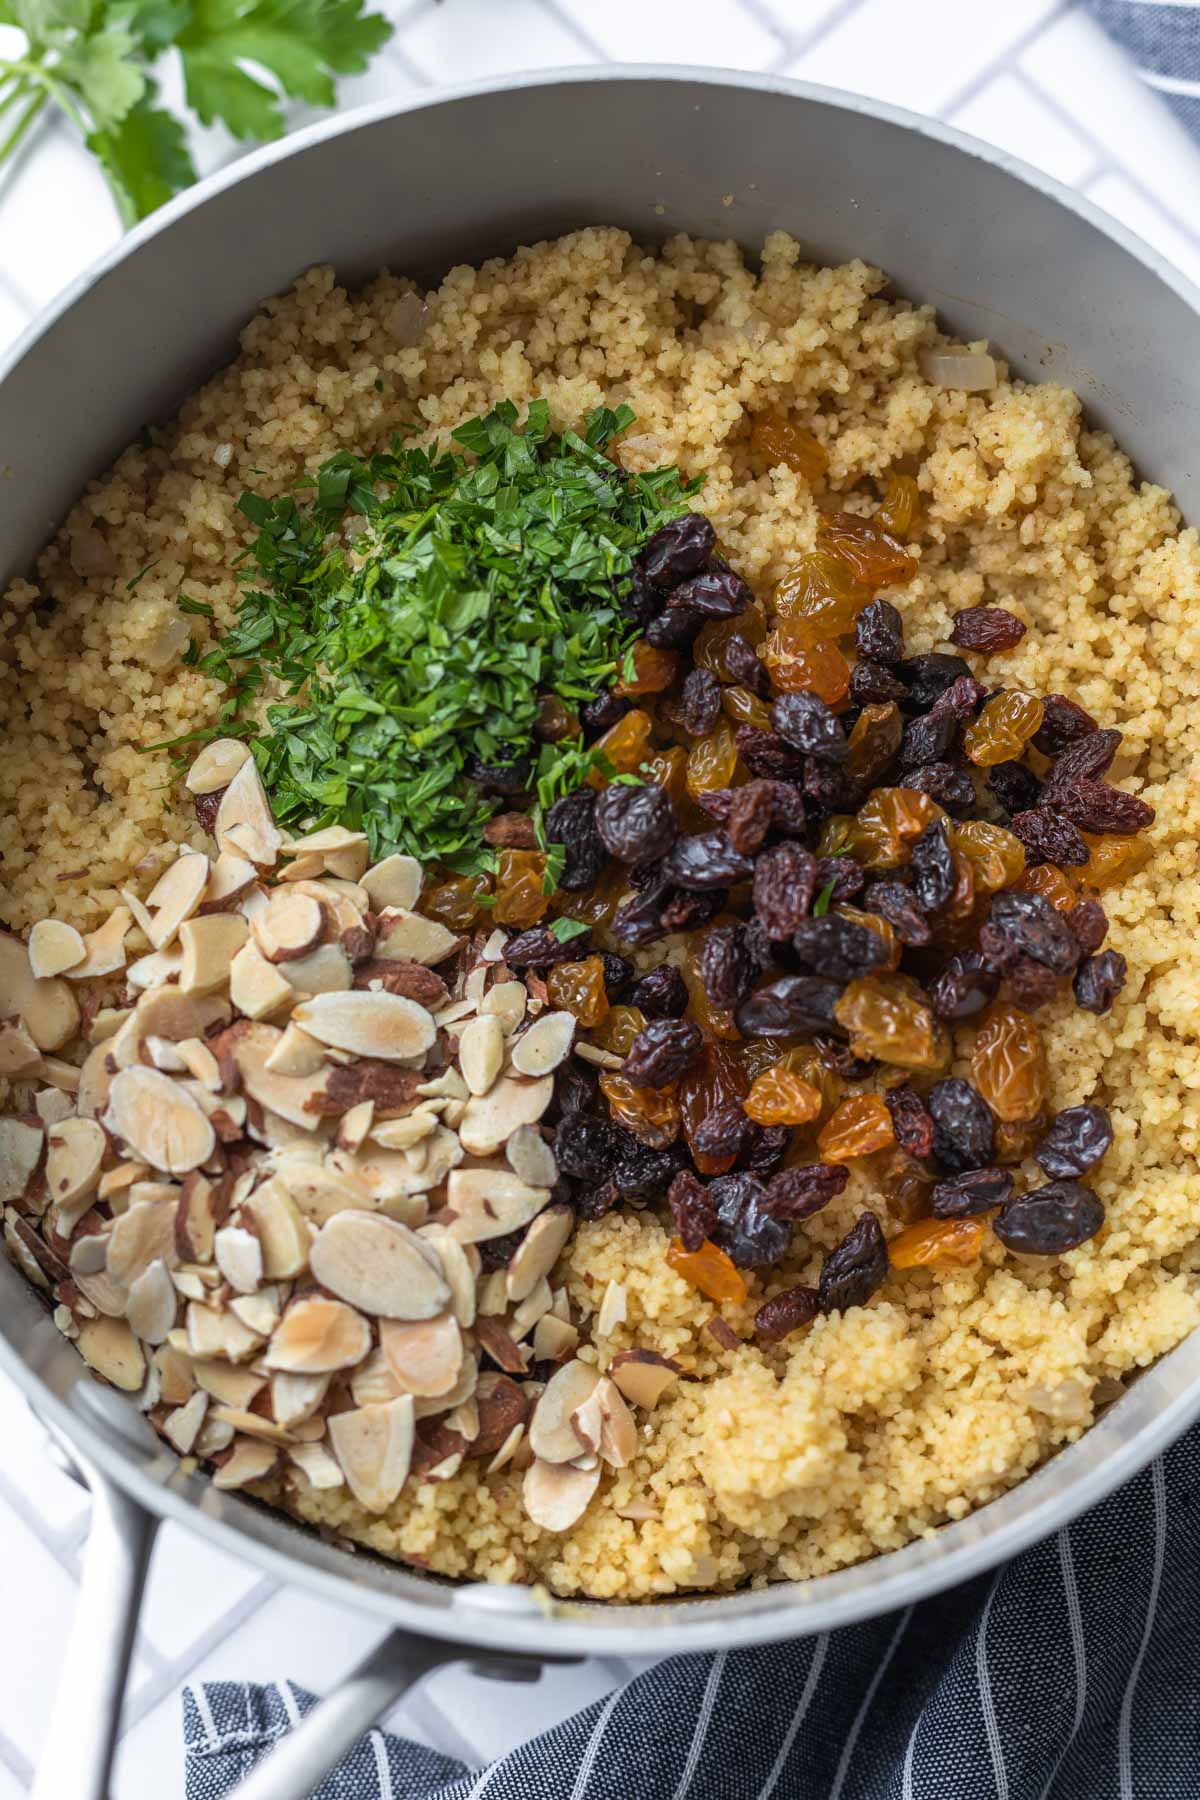 Moroccan couscous ingredients in a large saucepan